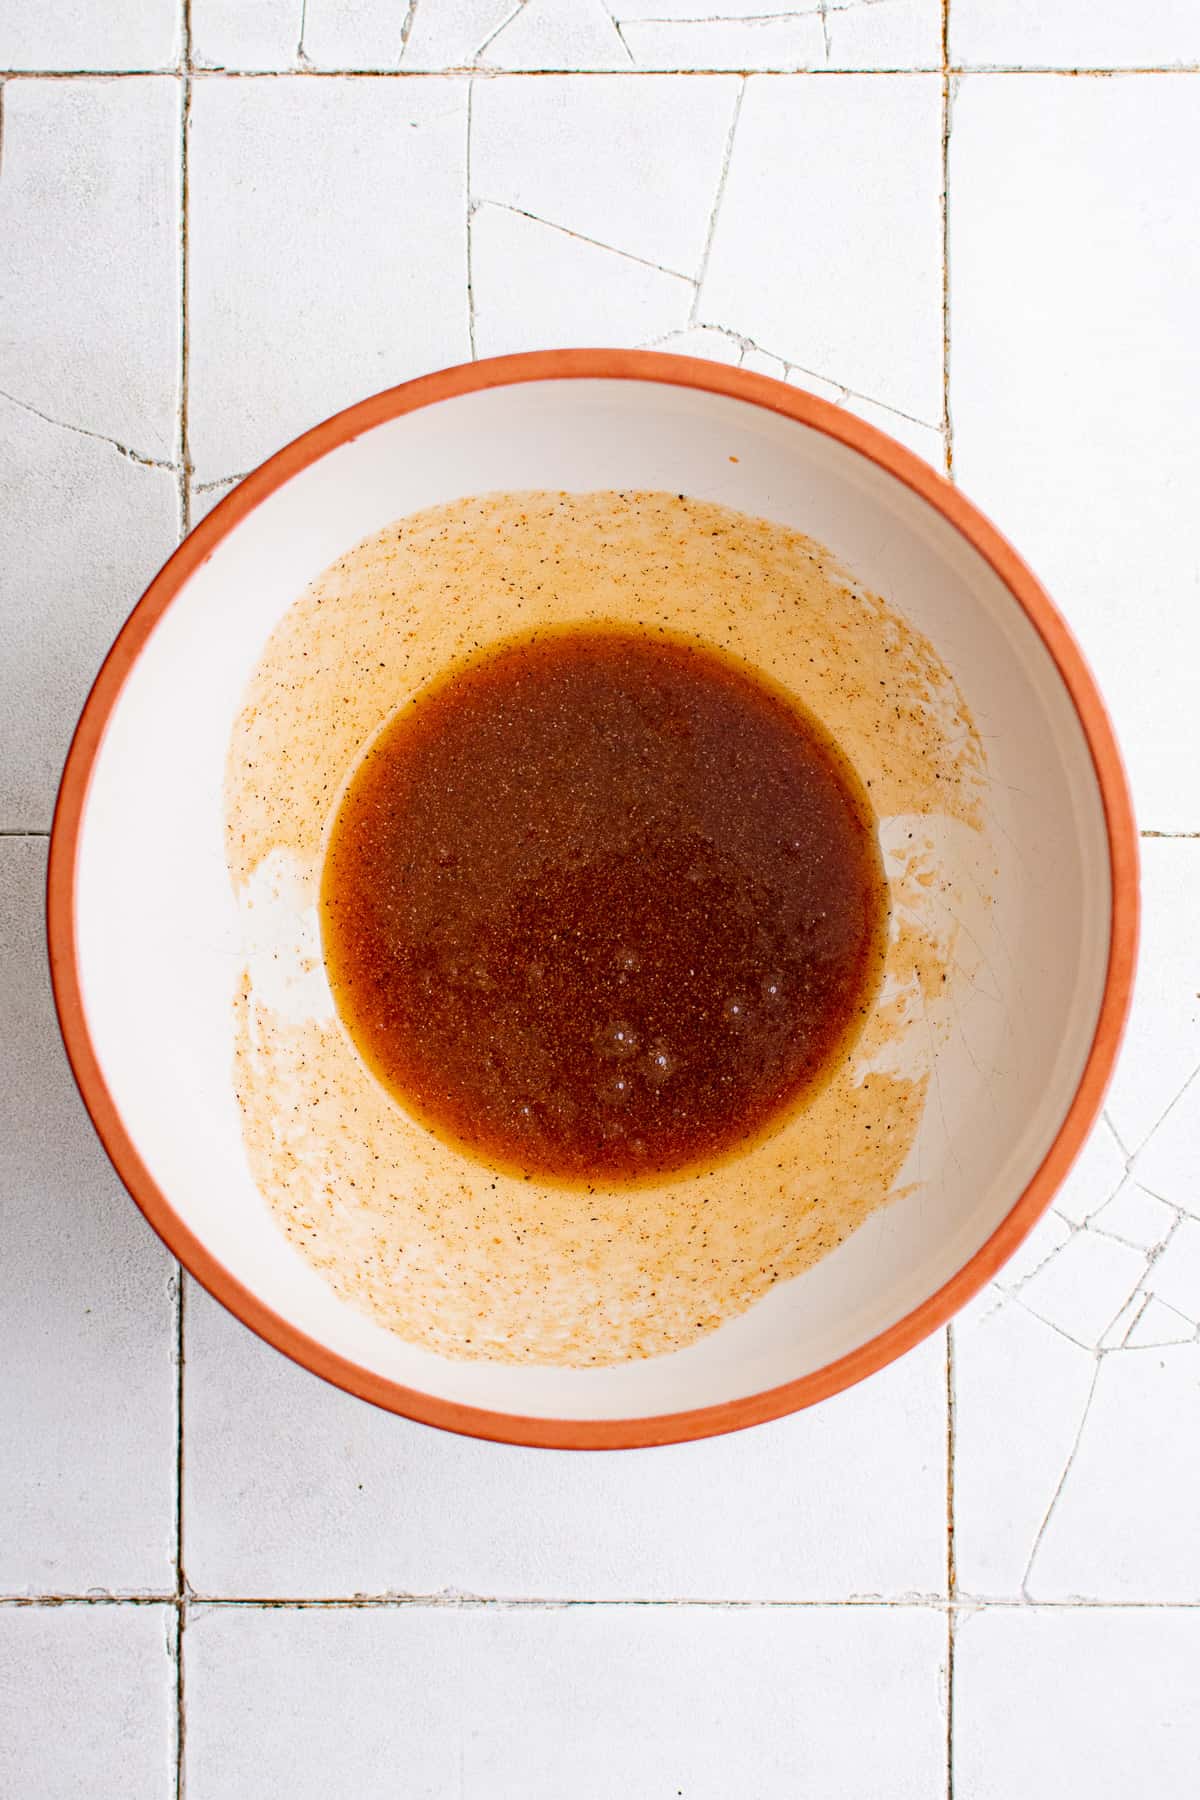 Top down view of honey sriracha mixture in a bowl.